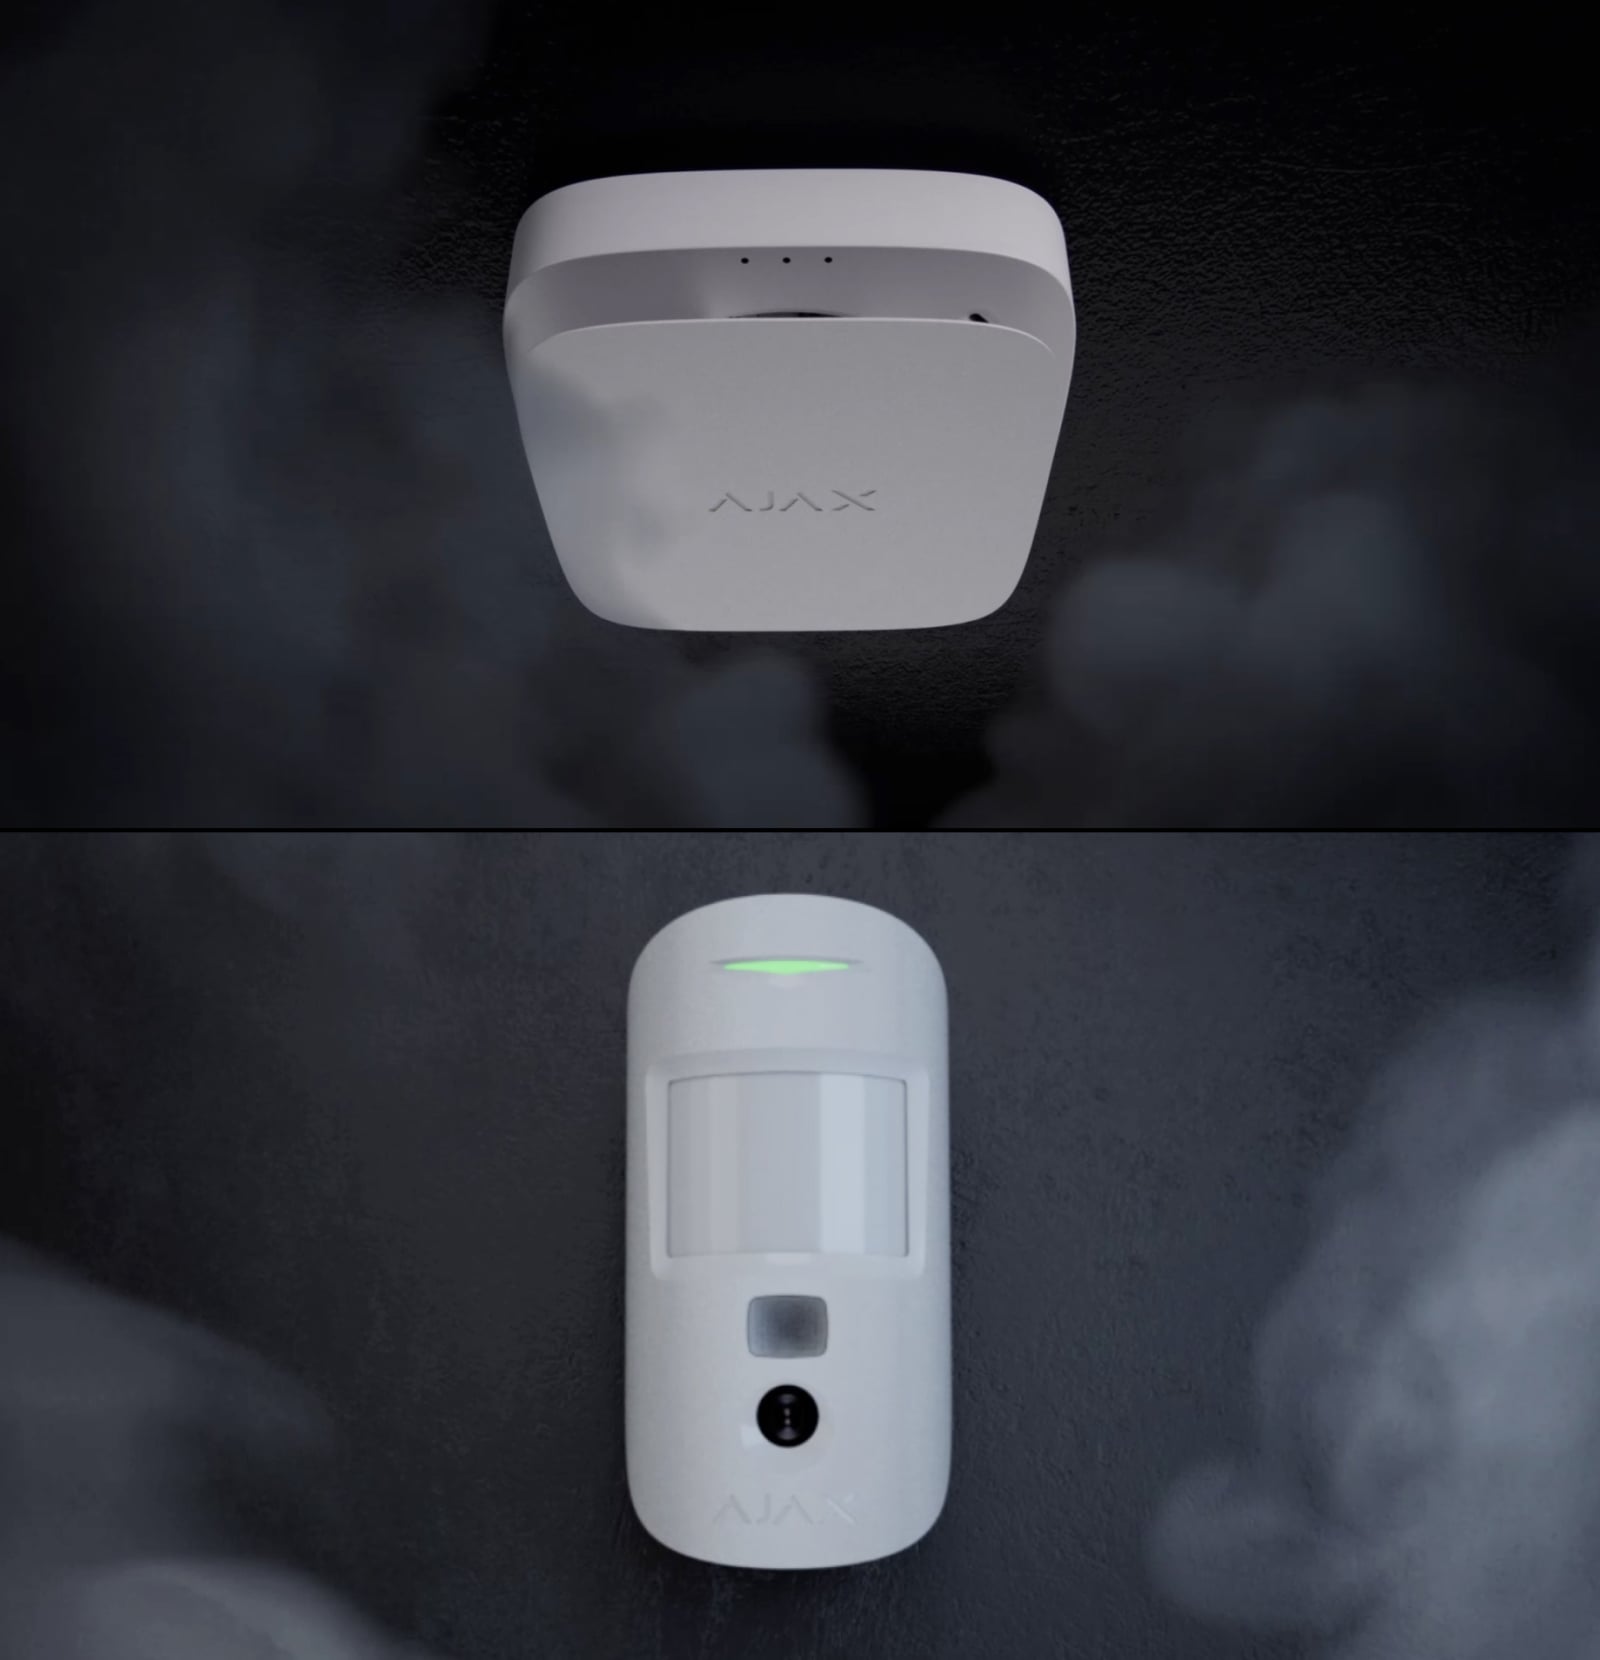 AJAX MotionCam PhOD Wireless motion detector taking photos by alarm and on  demand - Vision Seguridad Plus S.L.